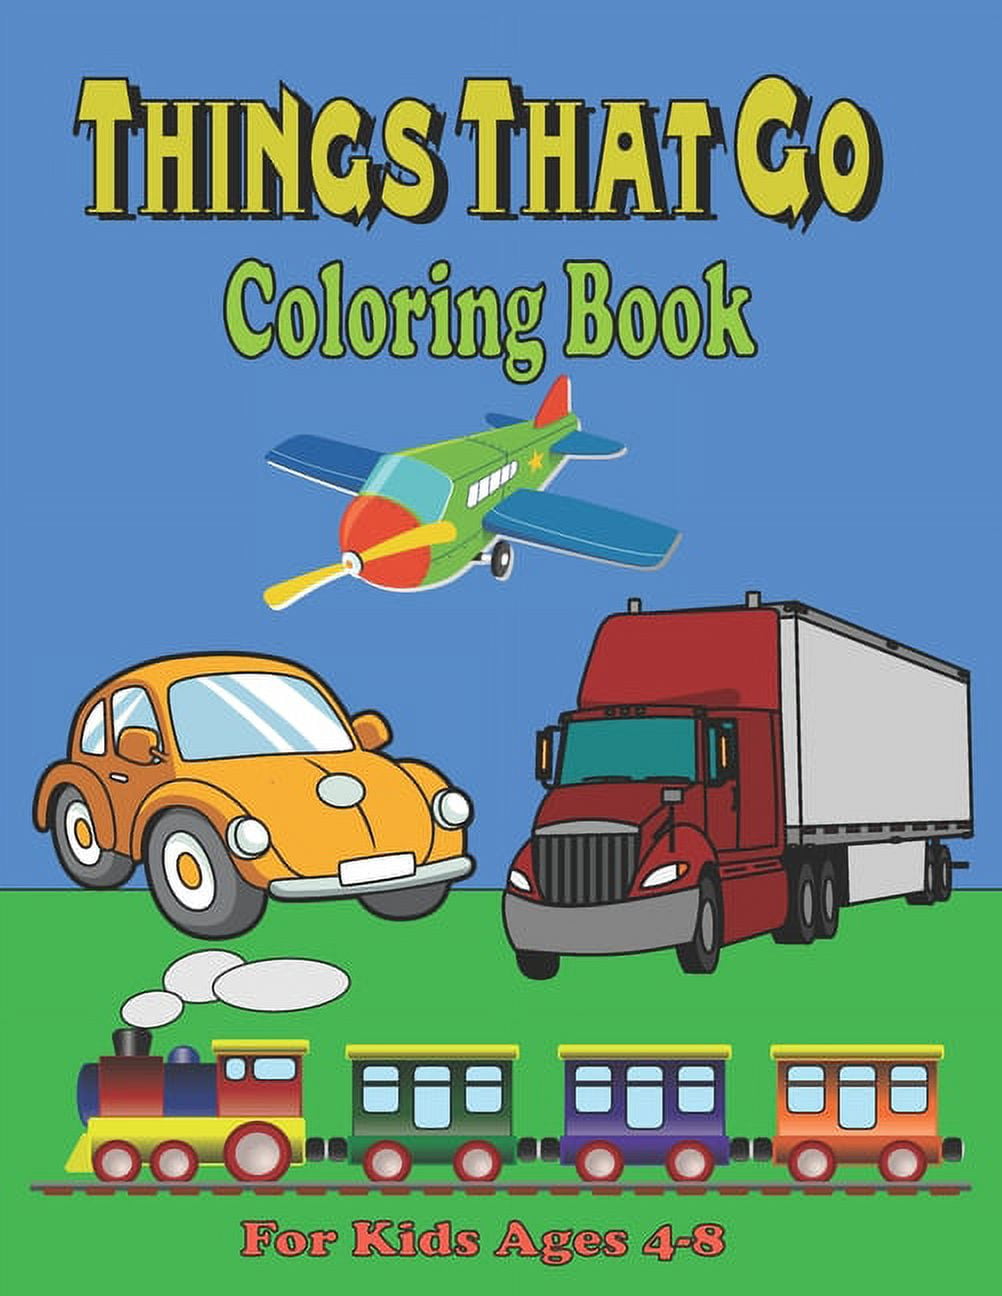 coloring books for boys ages 2-4 4-8, cars, trucks, and planes: coloring  book